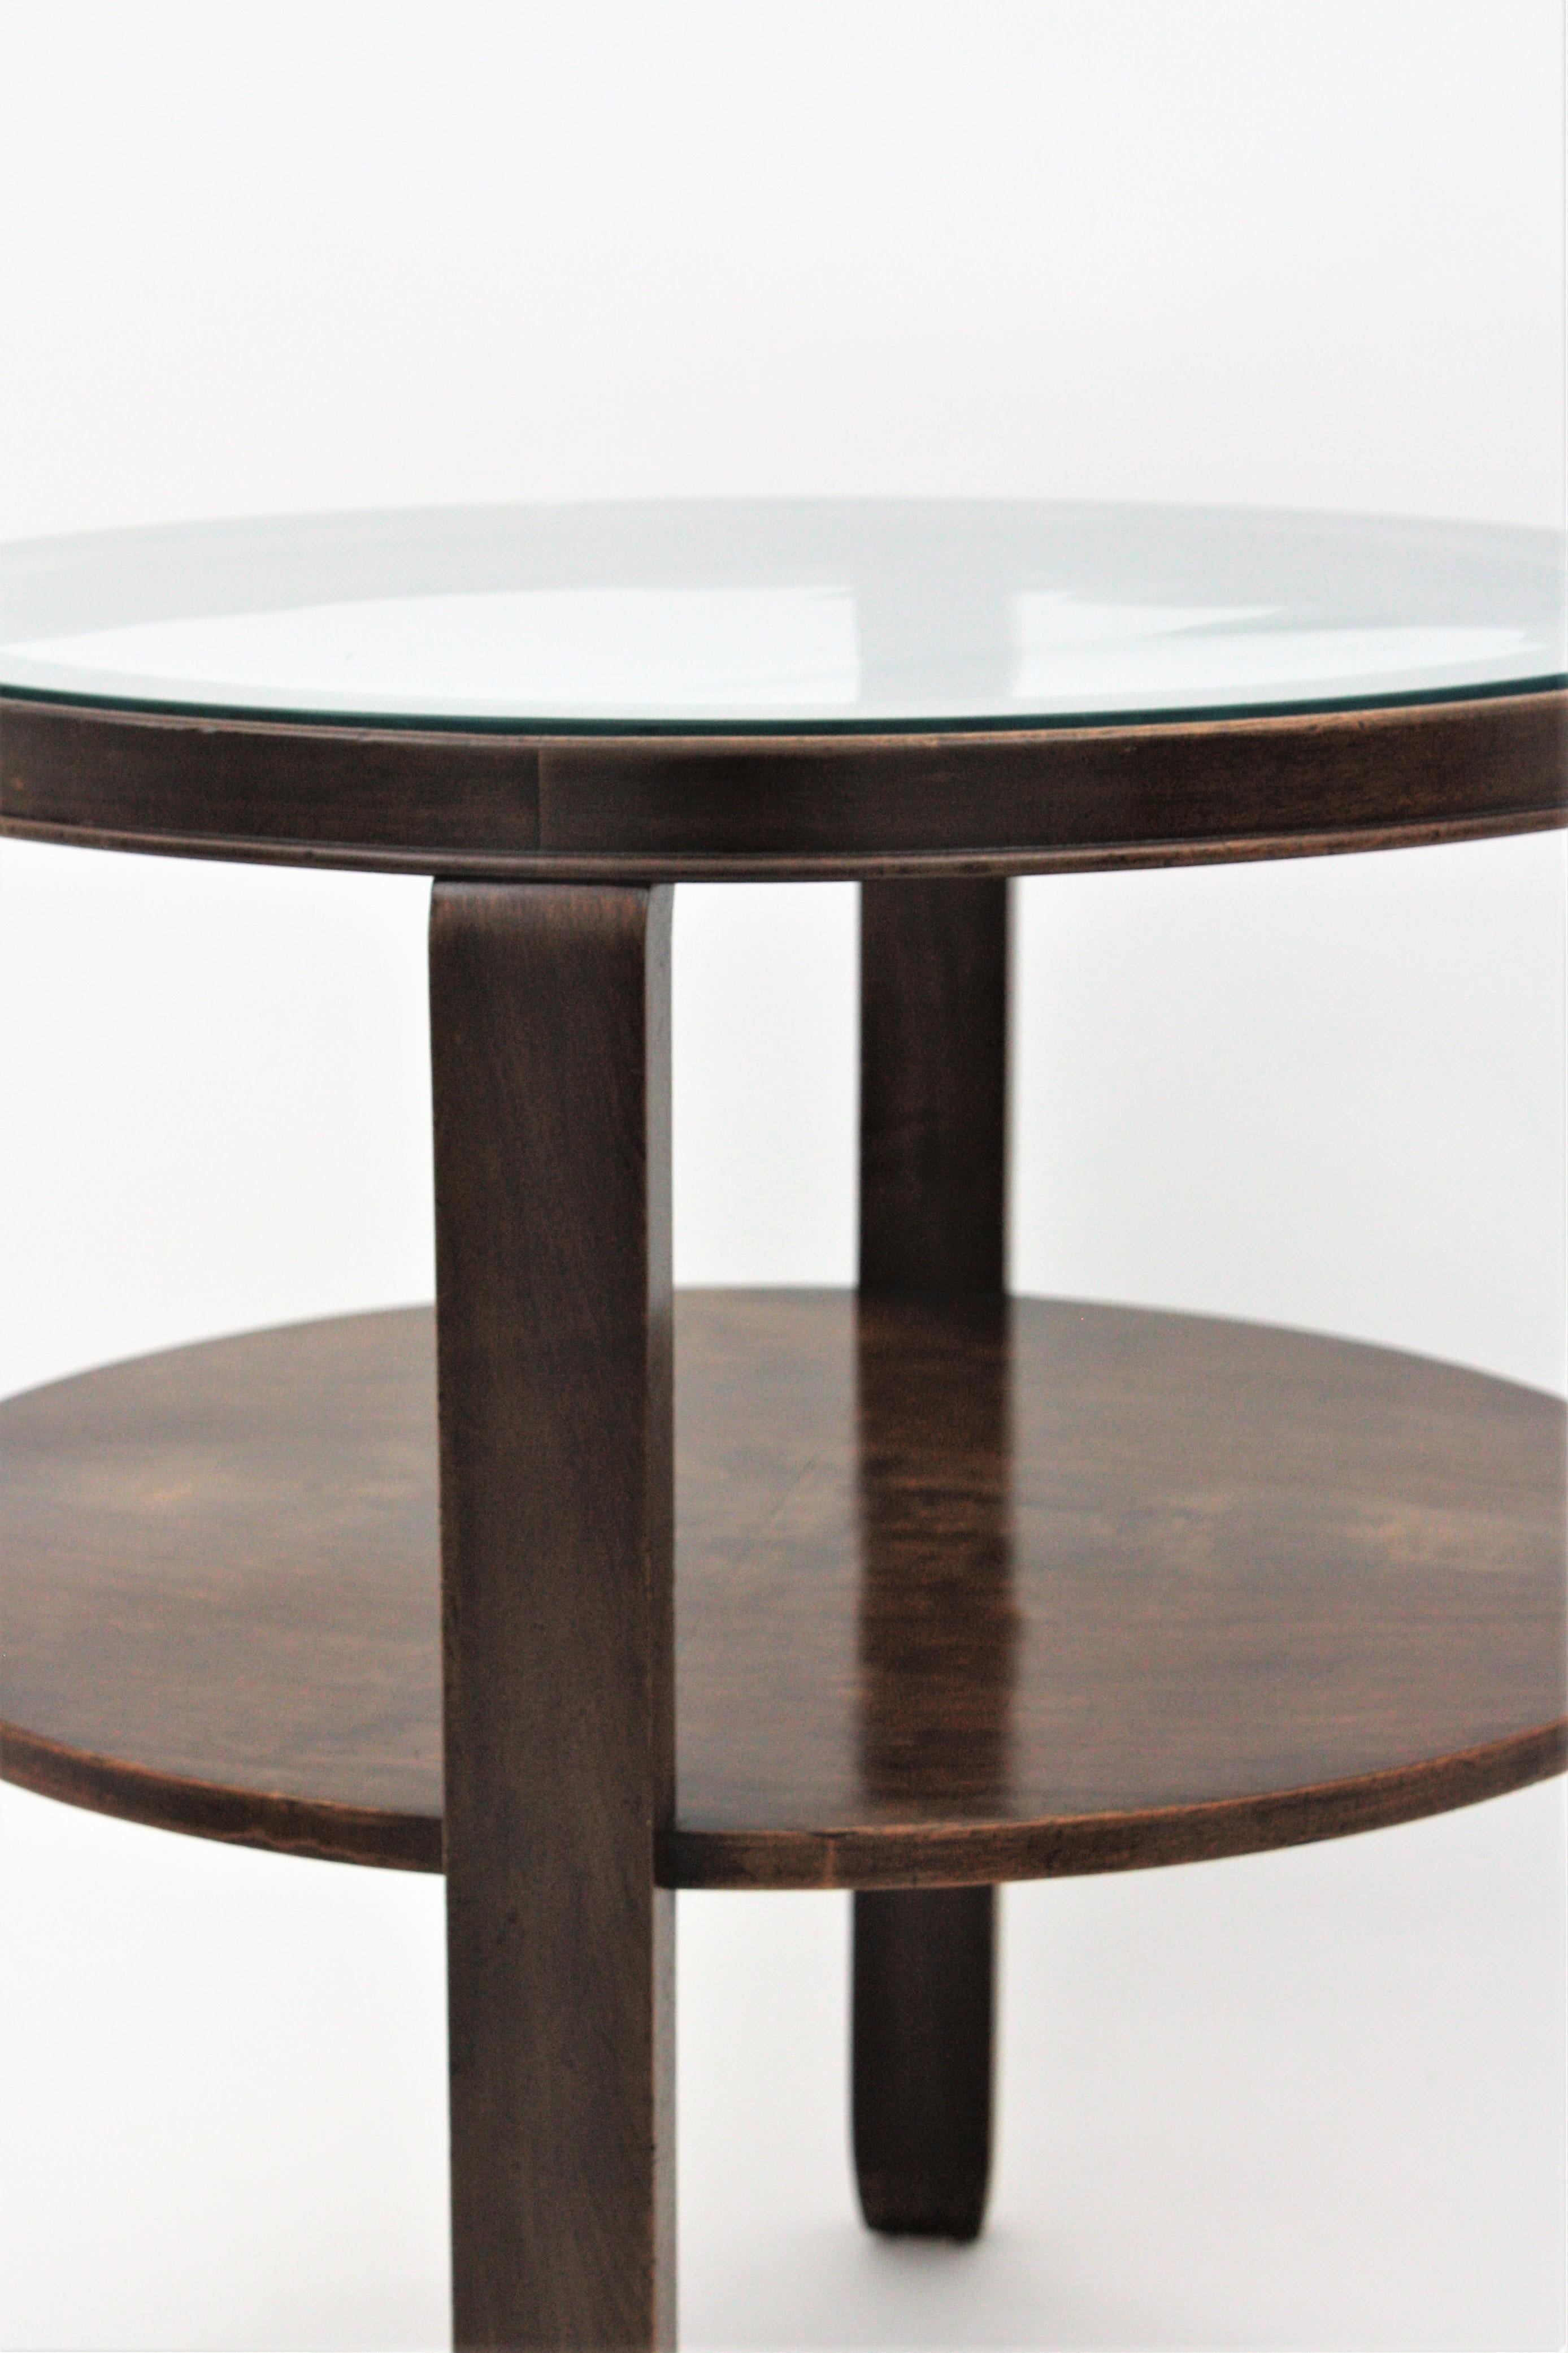 French Art Deco Two Level Coffee Table / Side Table in Walnut For Sale 7